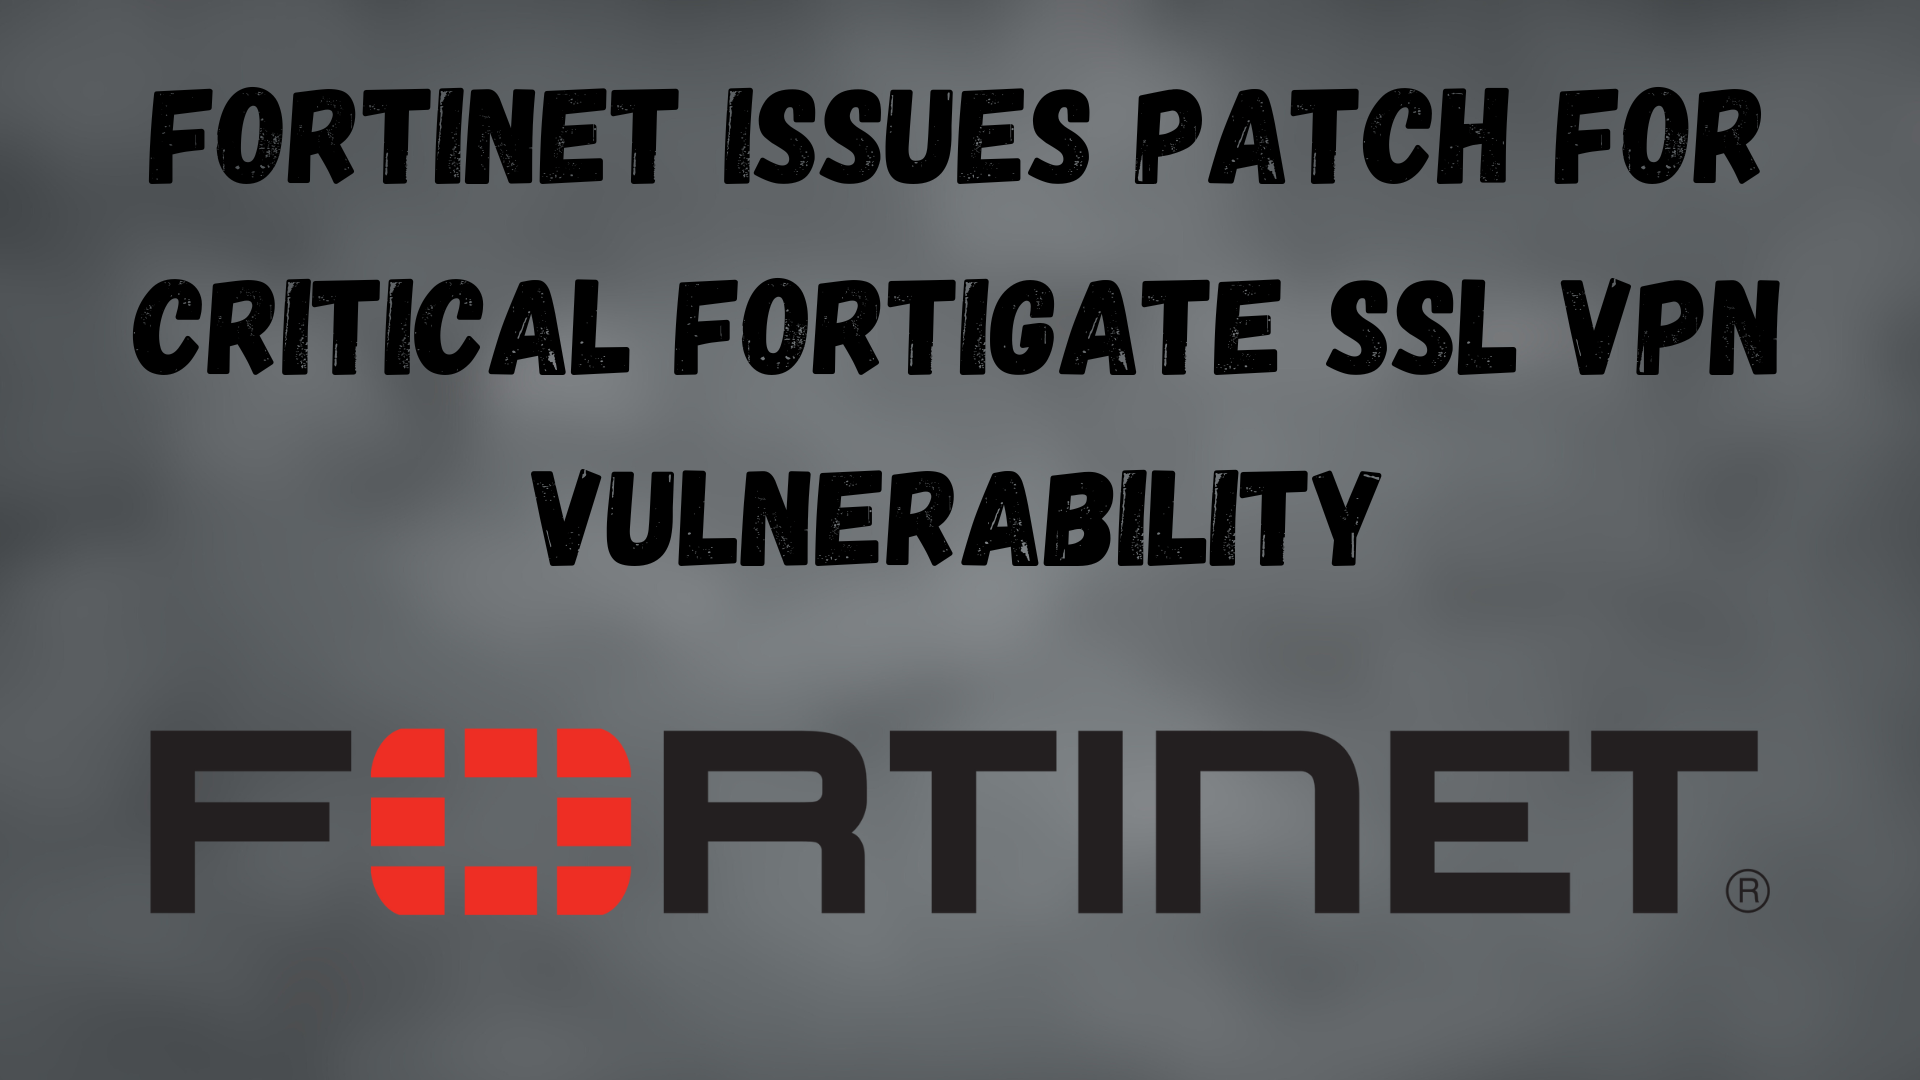 fortinet issues patch for critical fortigate ssl vpn vulnerability